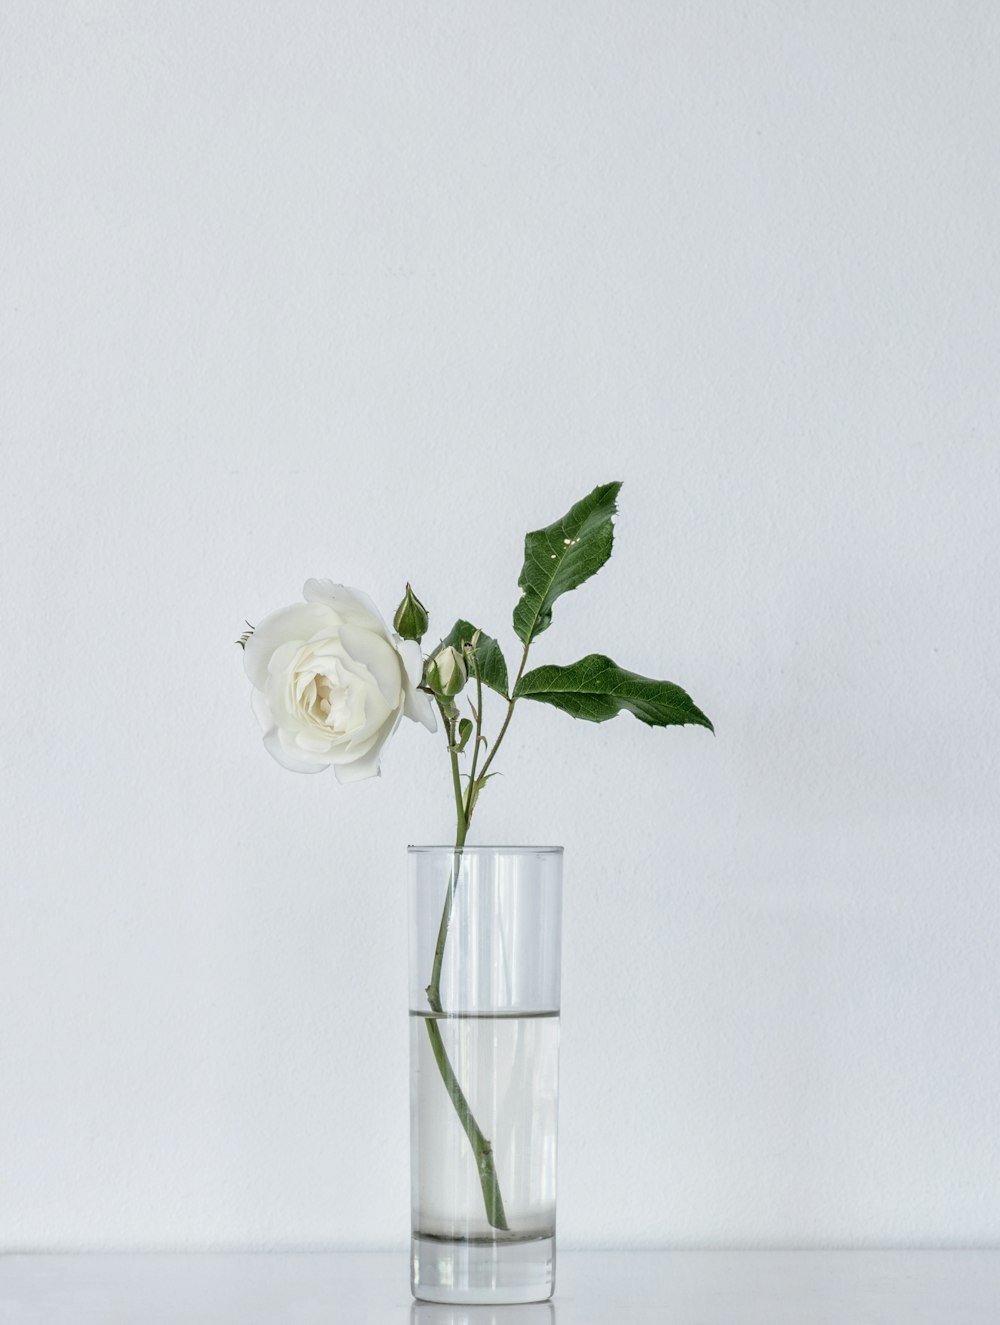 Glass Flower Pictures  Download Free Images on Unsplash